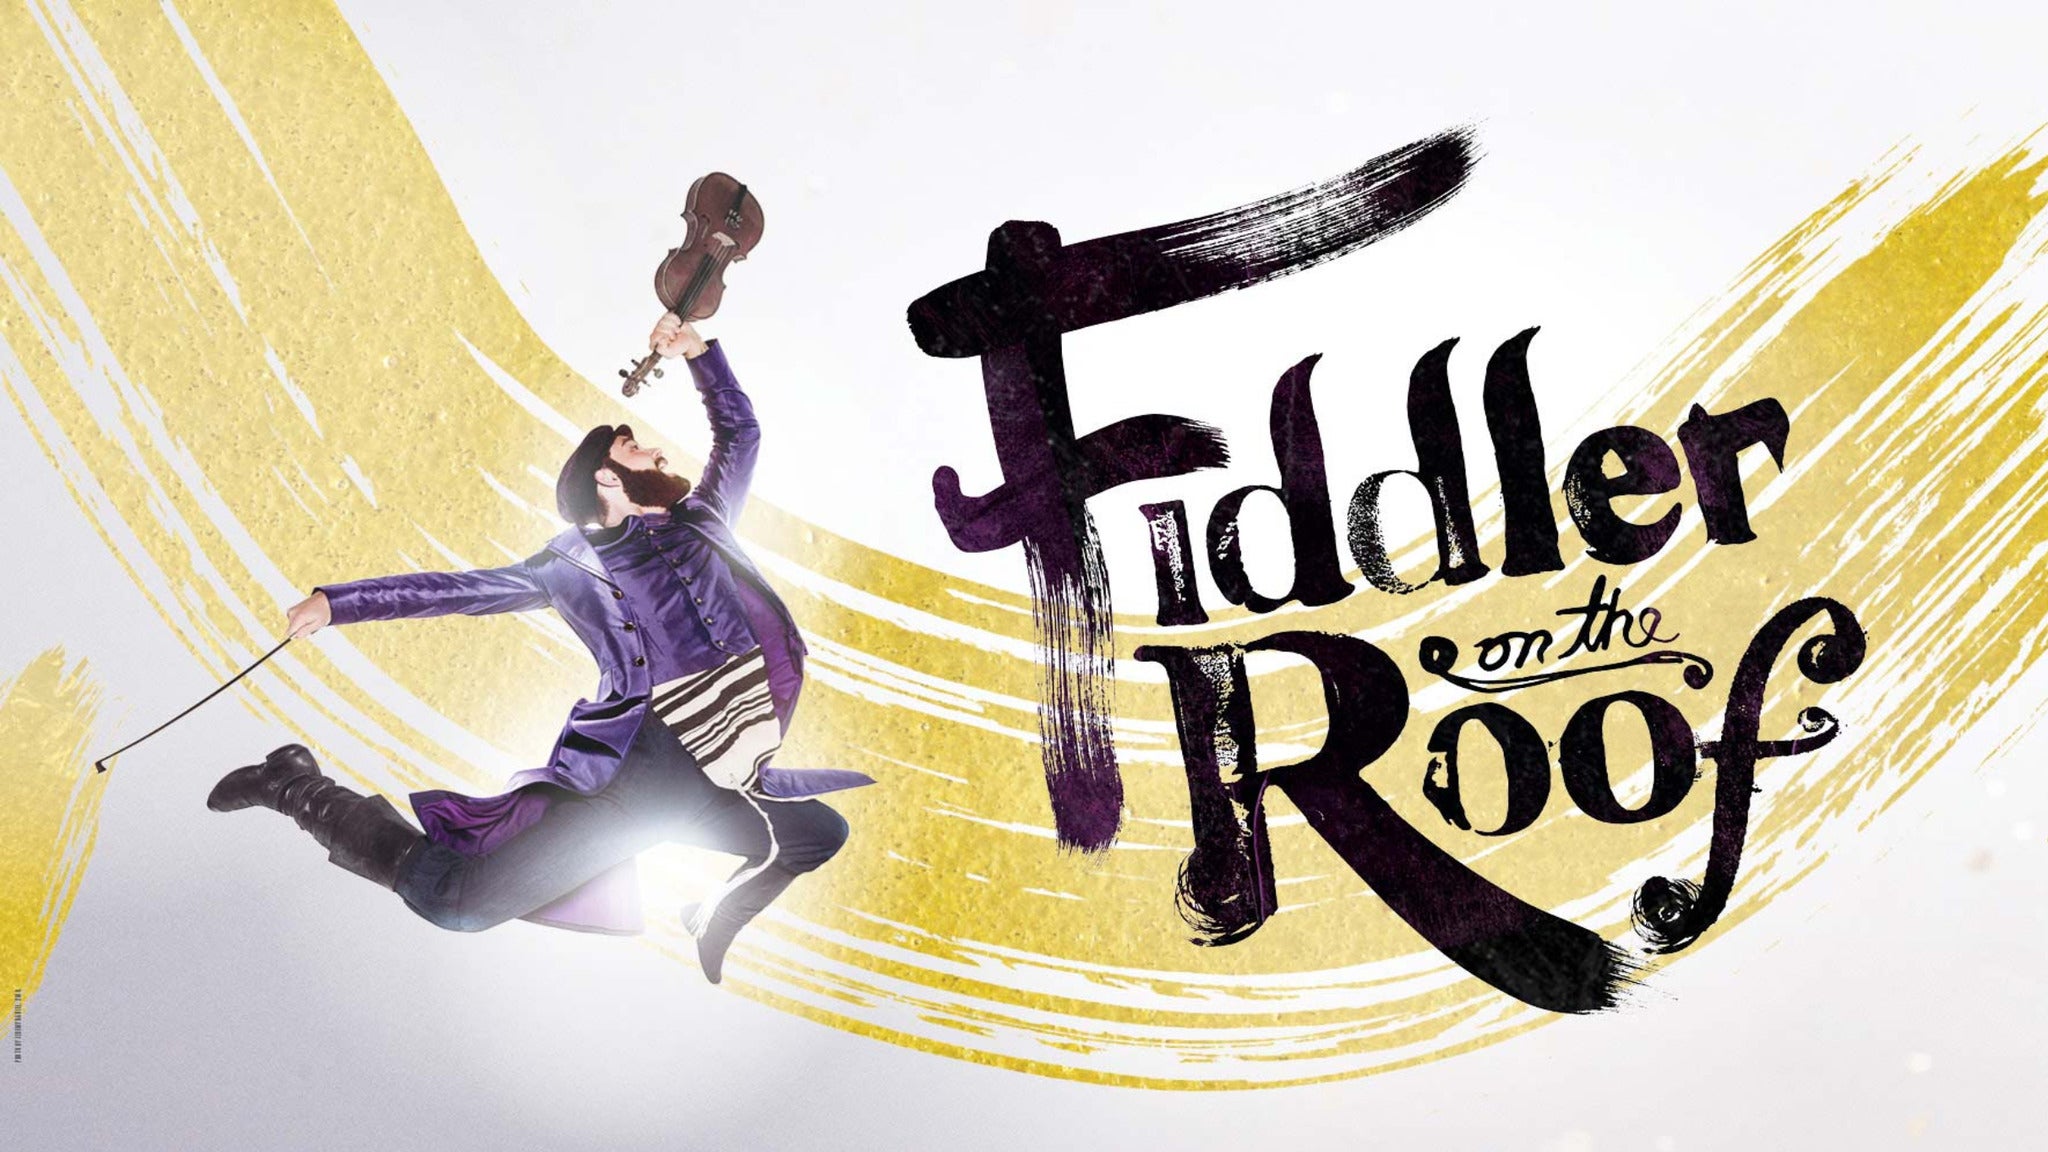 Fiddler On The Roof pre-sale password for show tickets in Pensacola, FL (Pensacola Saenger Theatre)